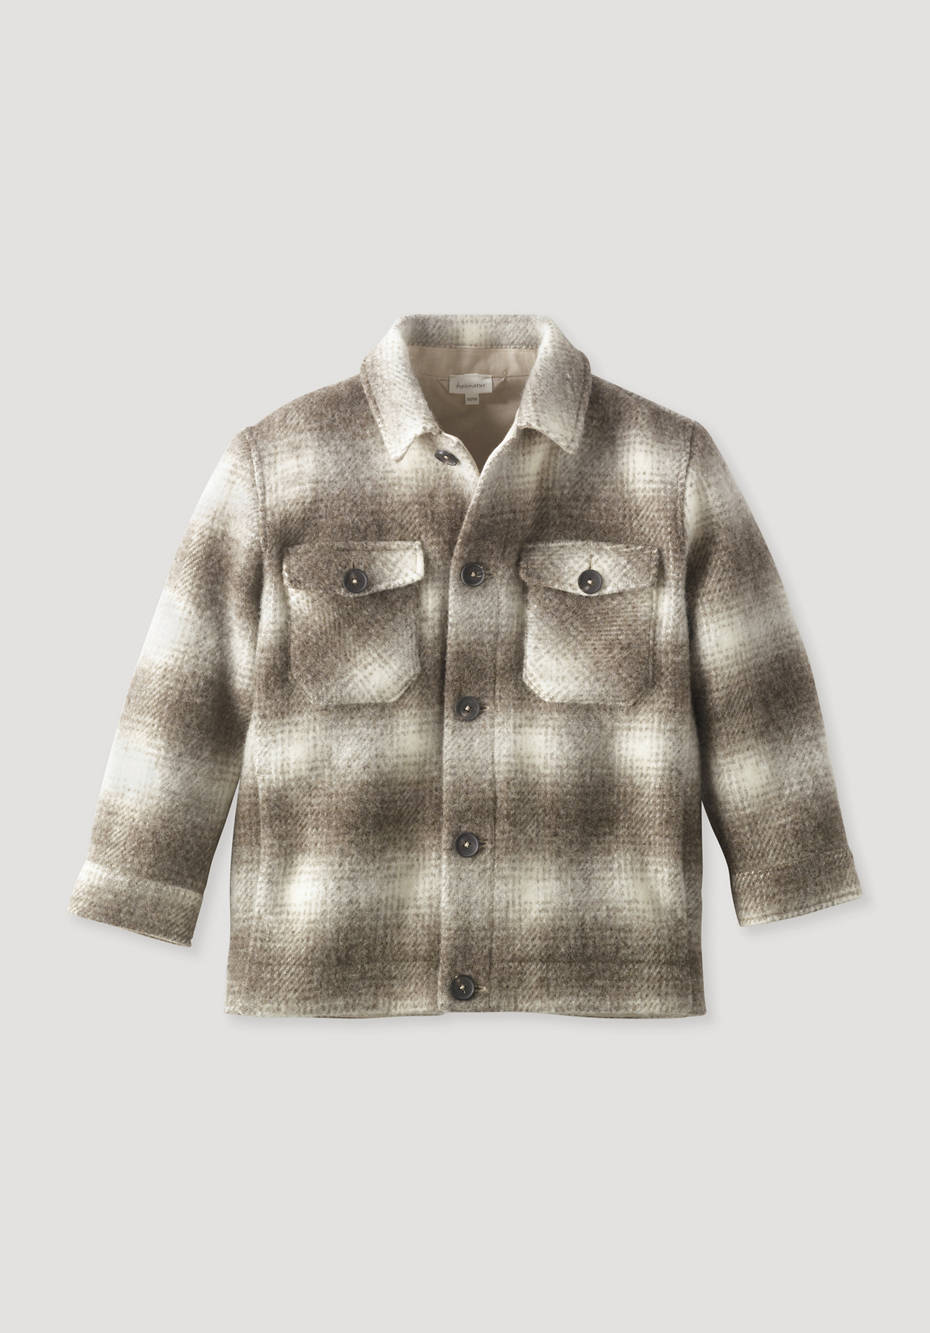 Rhön check overshirt made from pure new wool